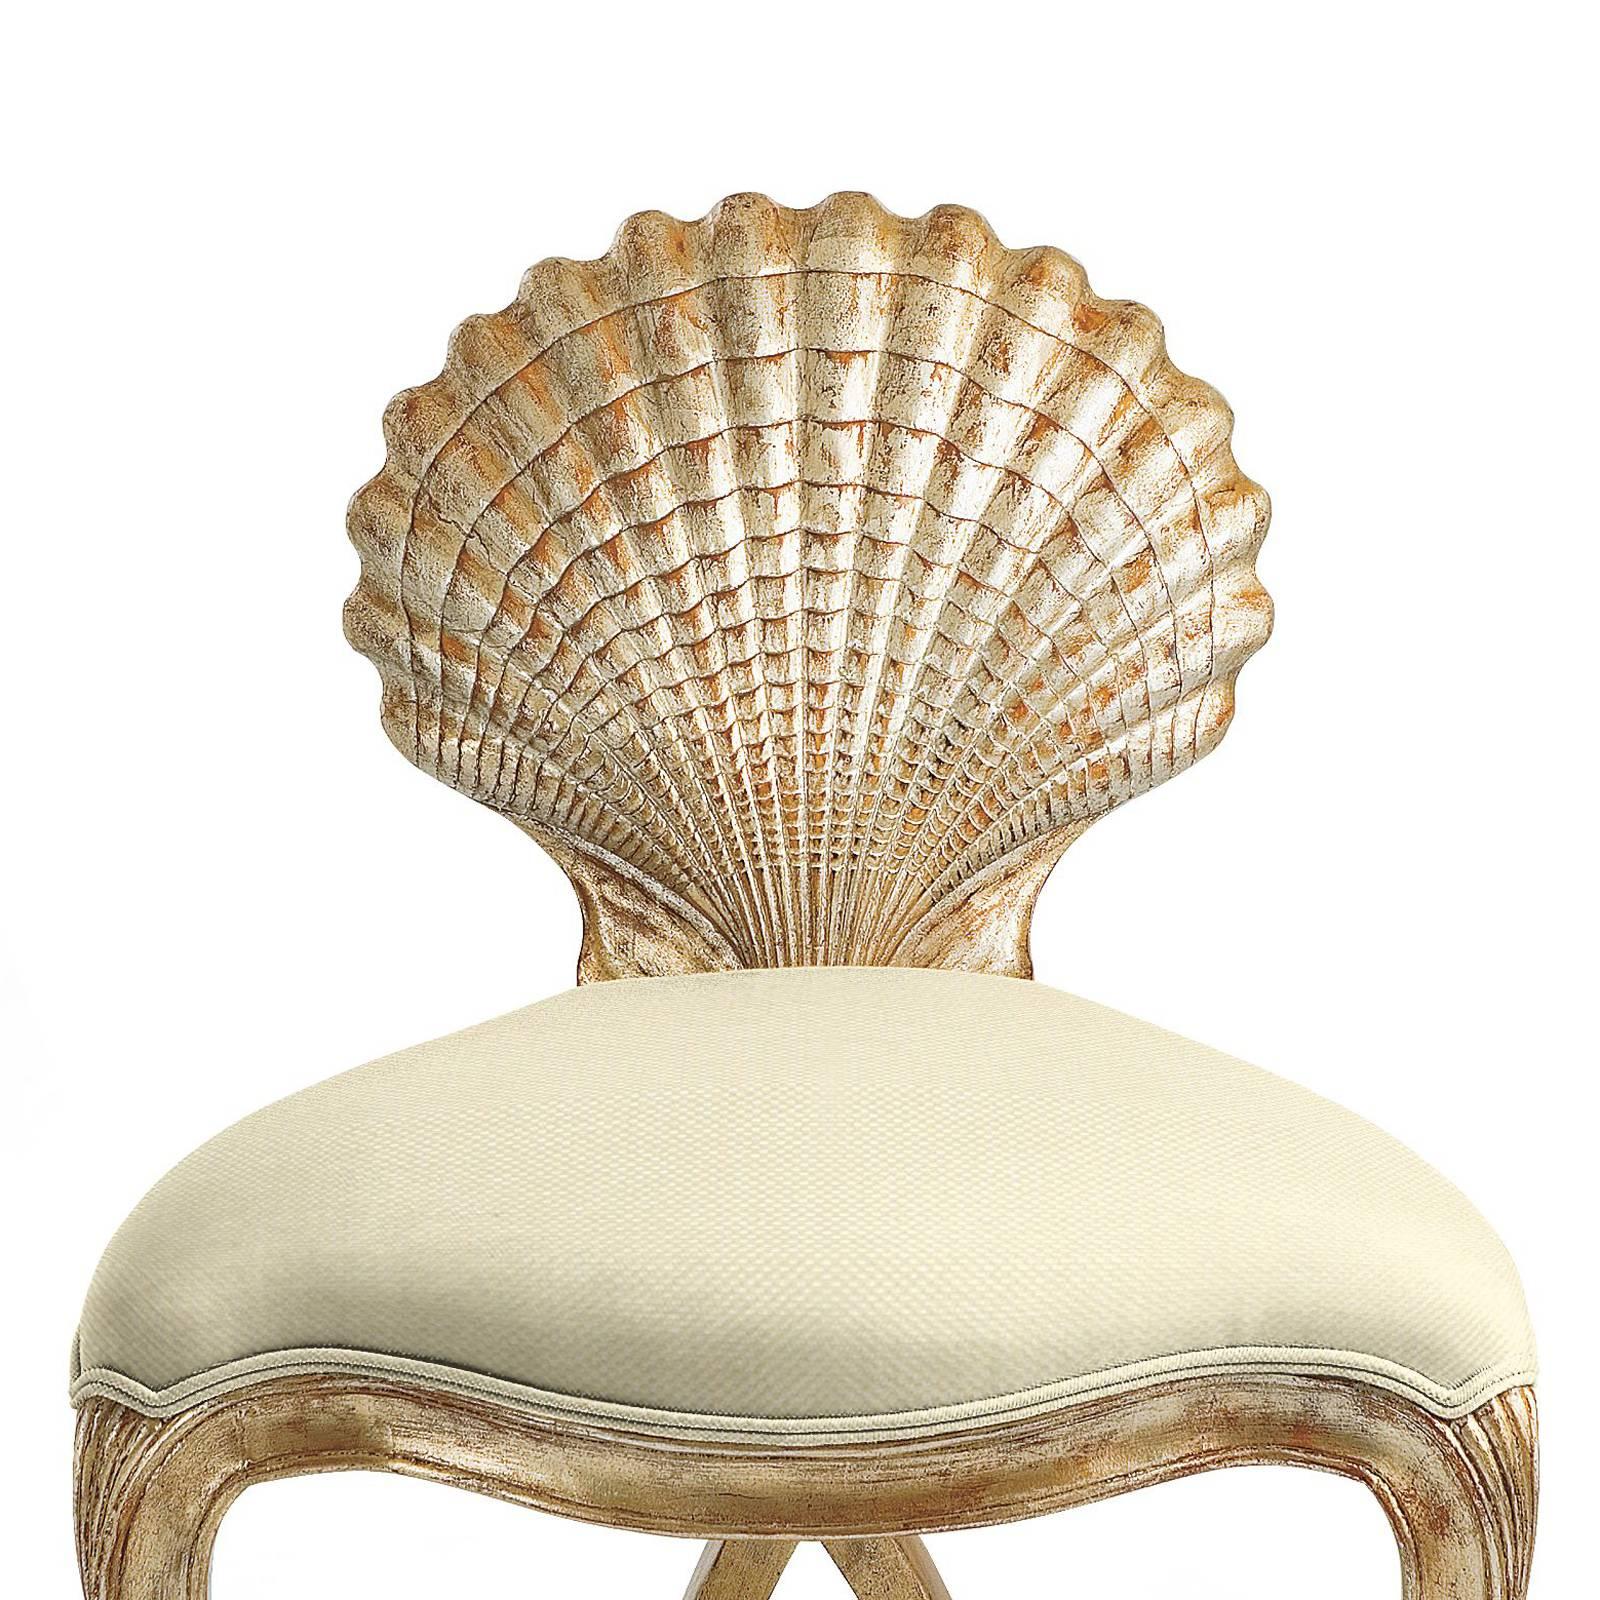 Chair gold shell with structure in hand-carved solid wood
which is hand-painted with silver gilt painting. Covered with
high quality fabric in cream finish. Also available with other
fabrics on requests.